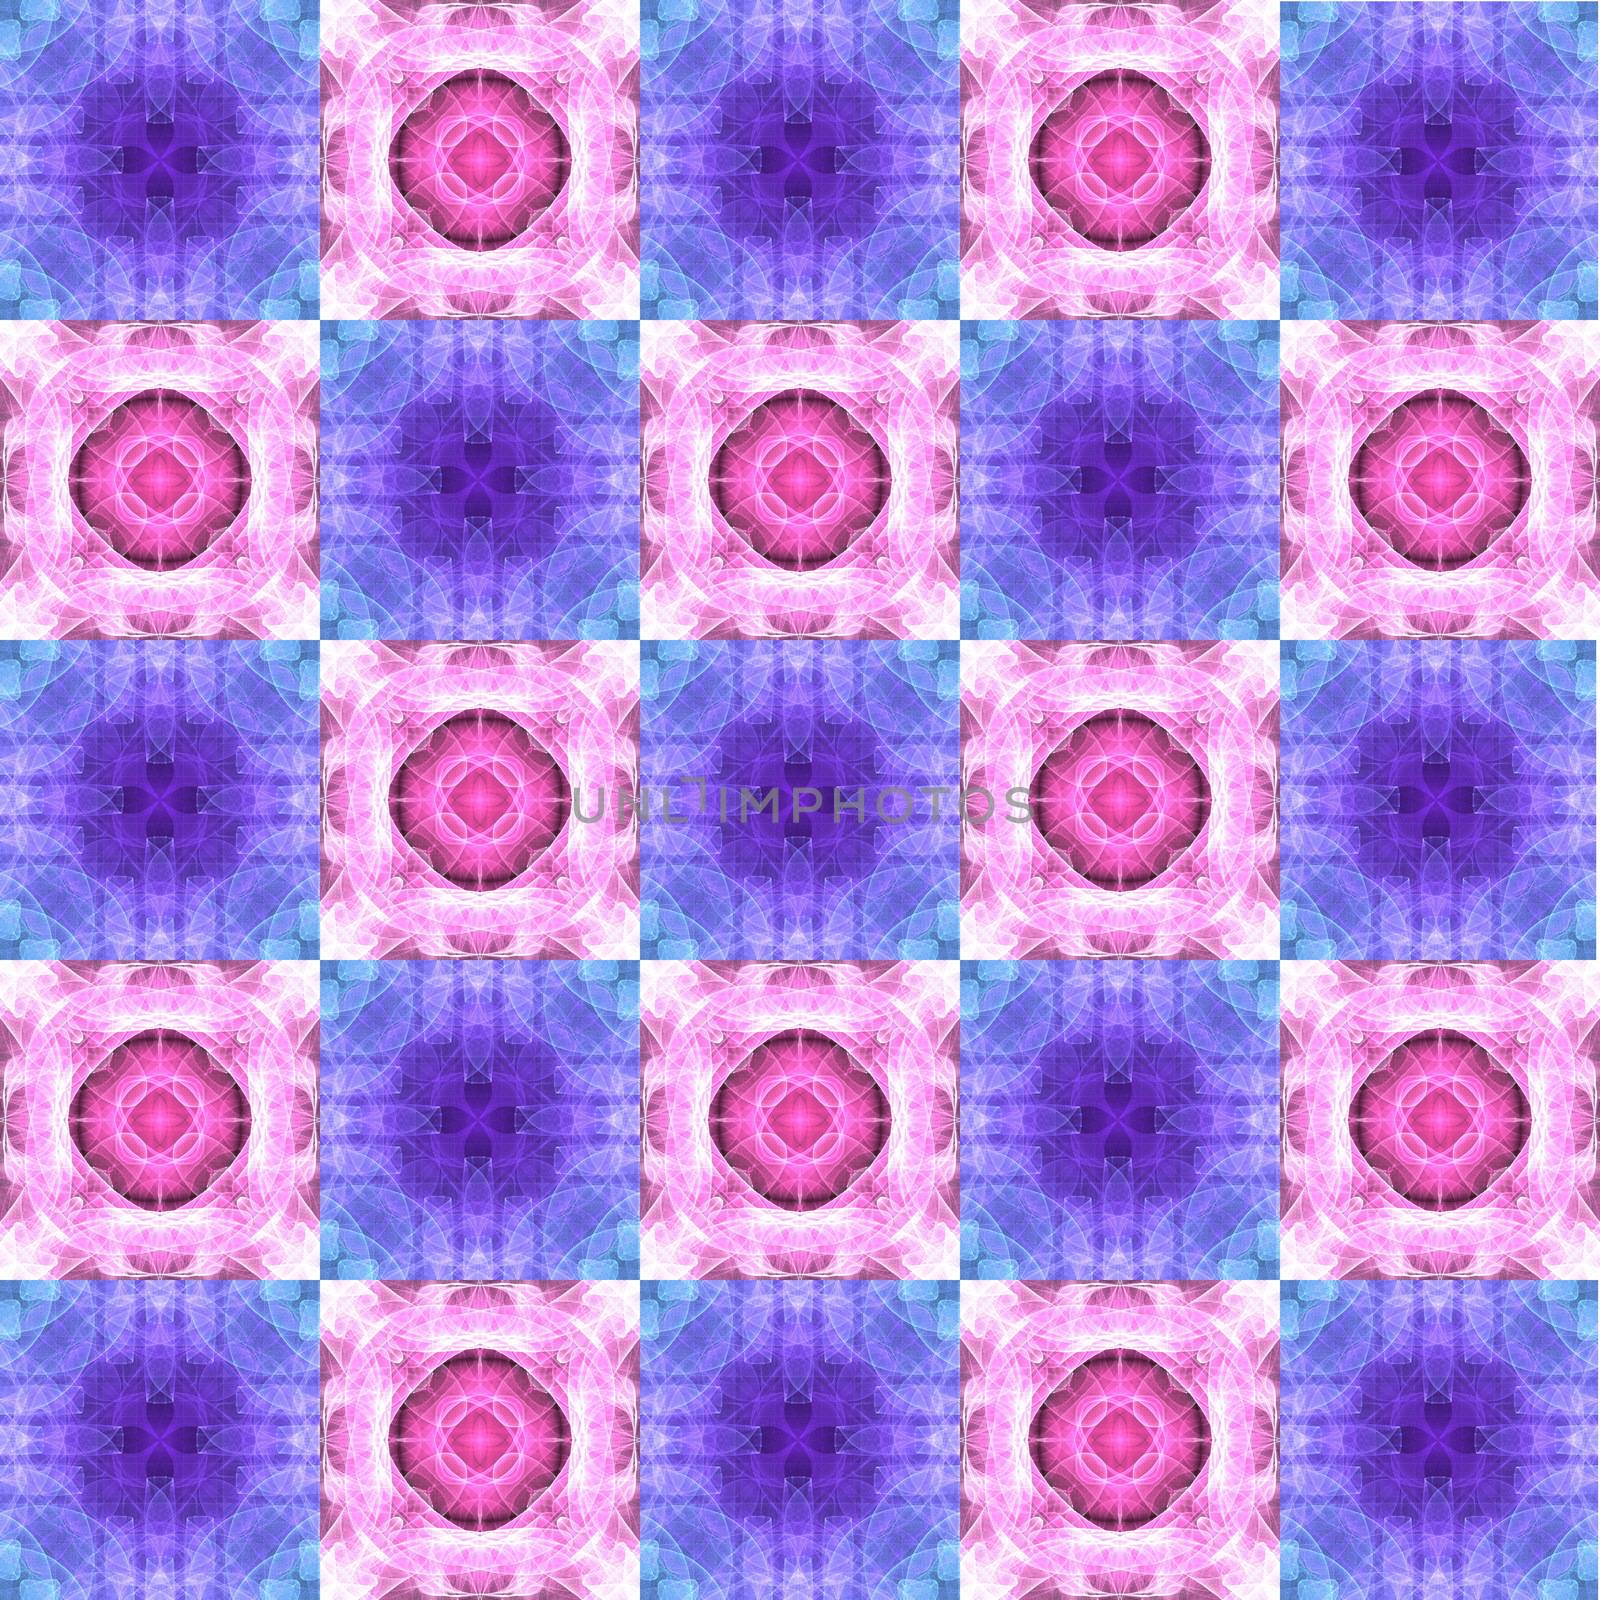 Fractal seamless creative pattern in violet colors by amekamura